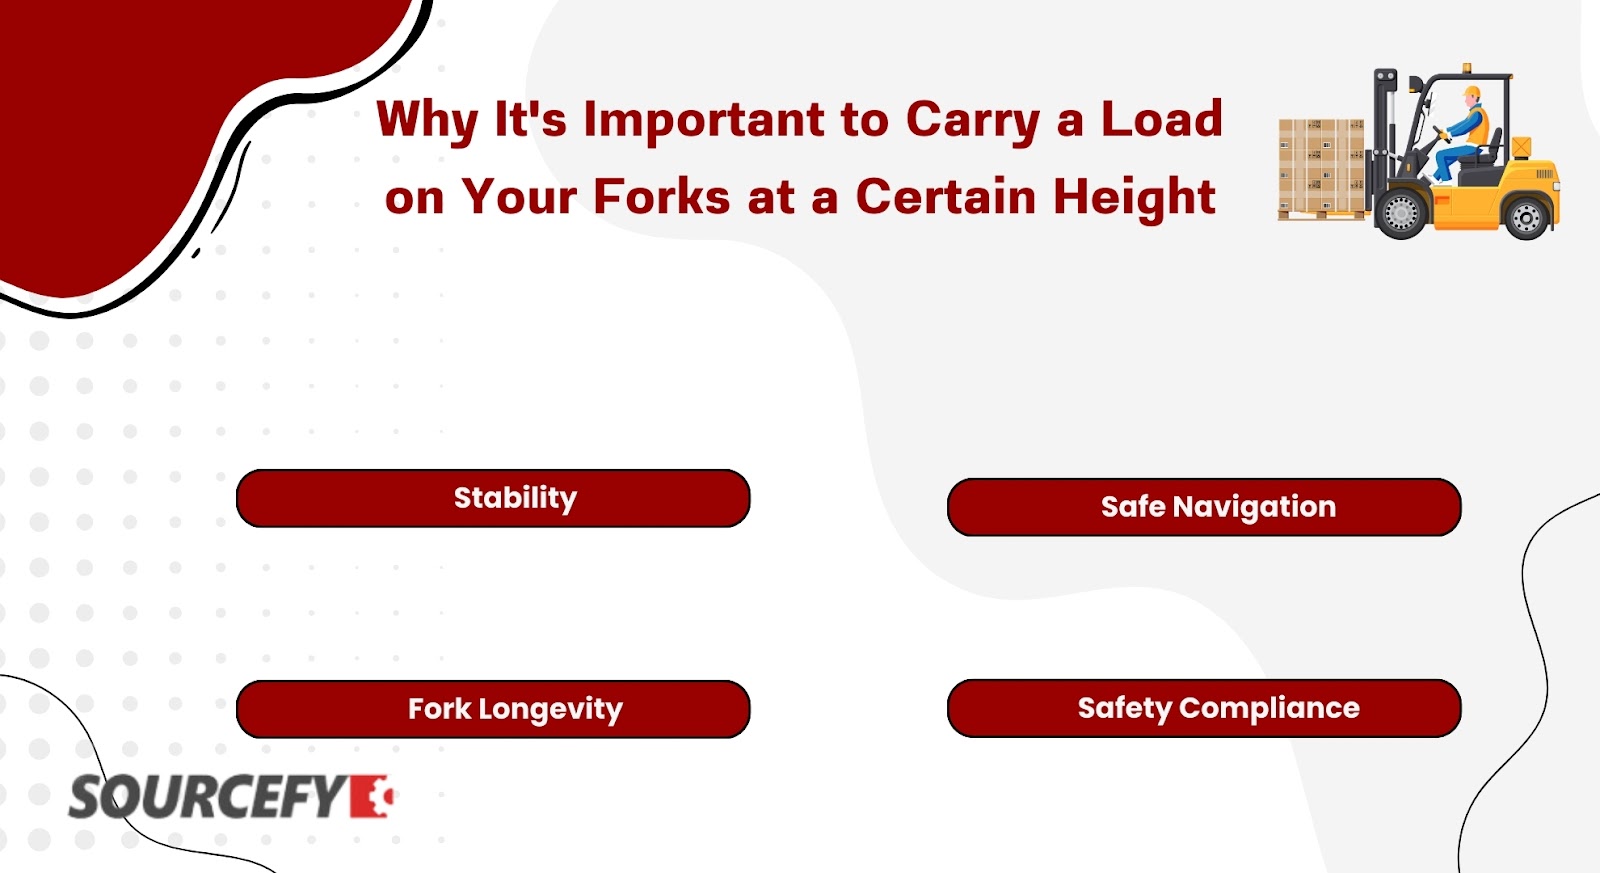 Why It's Important to Carry a Load on Your Forks at a Certain Height